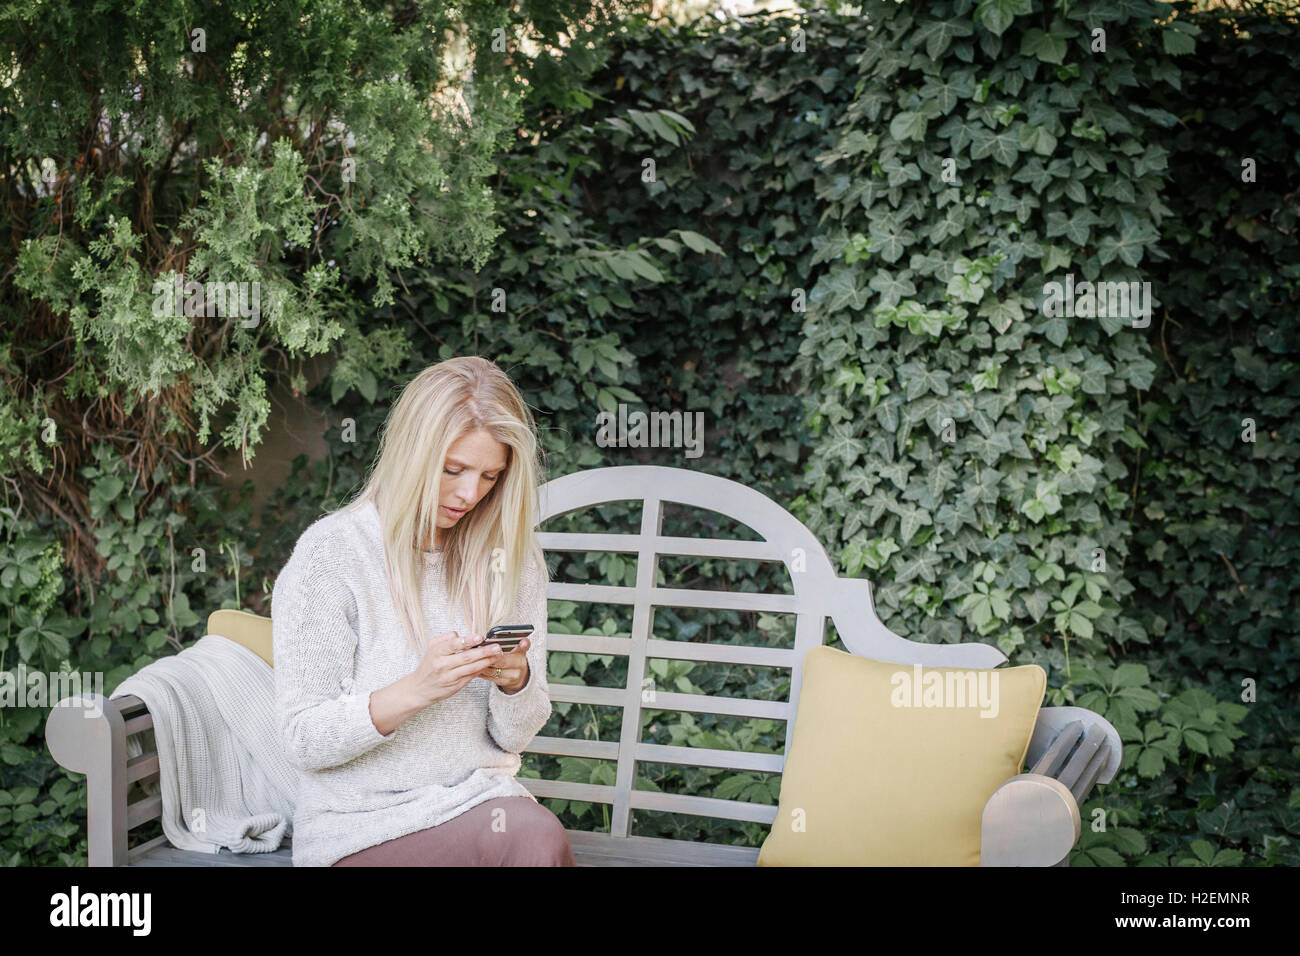 Woman sitting in a garden on  a bench, using her mobile phone. Stock Photo